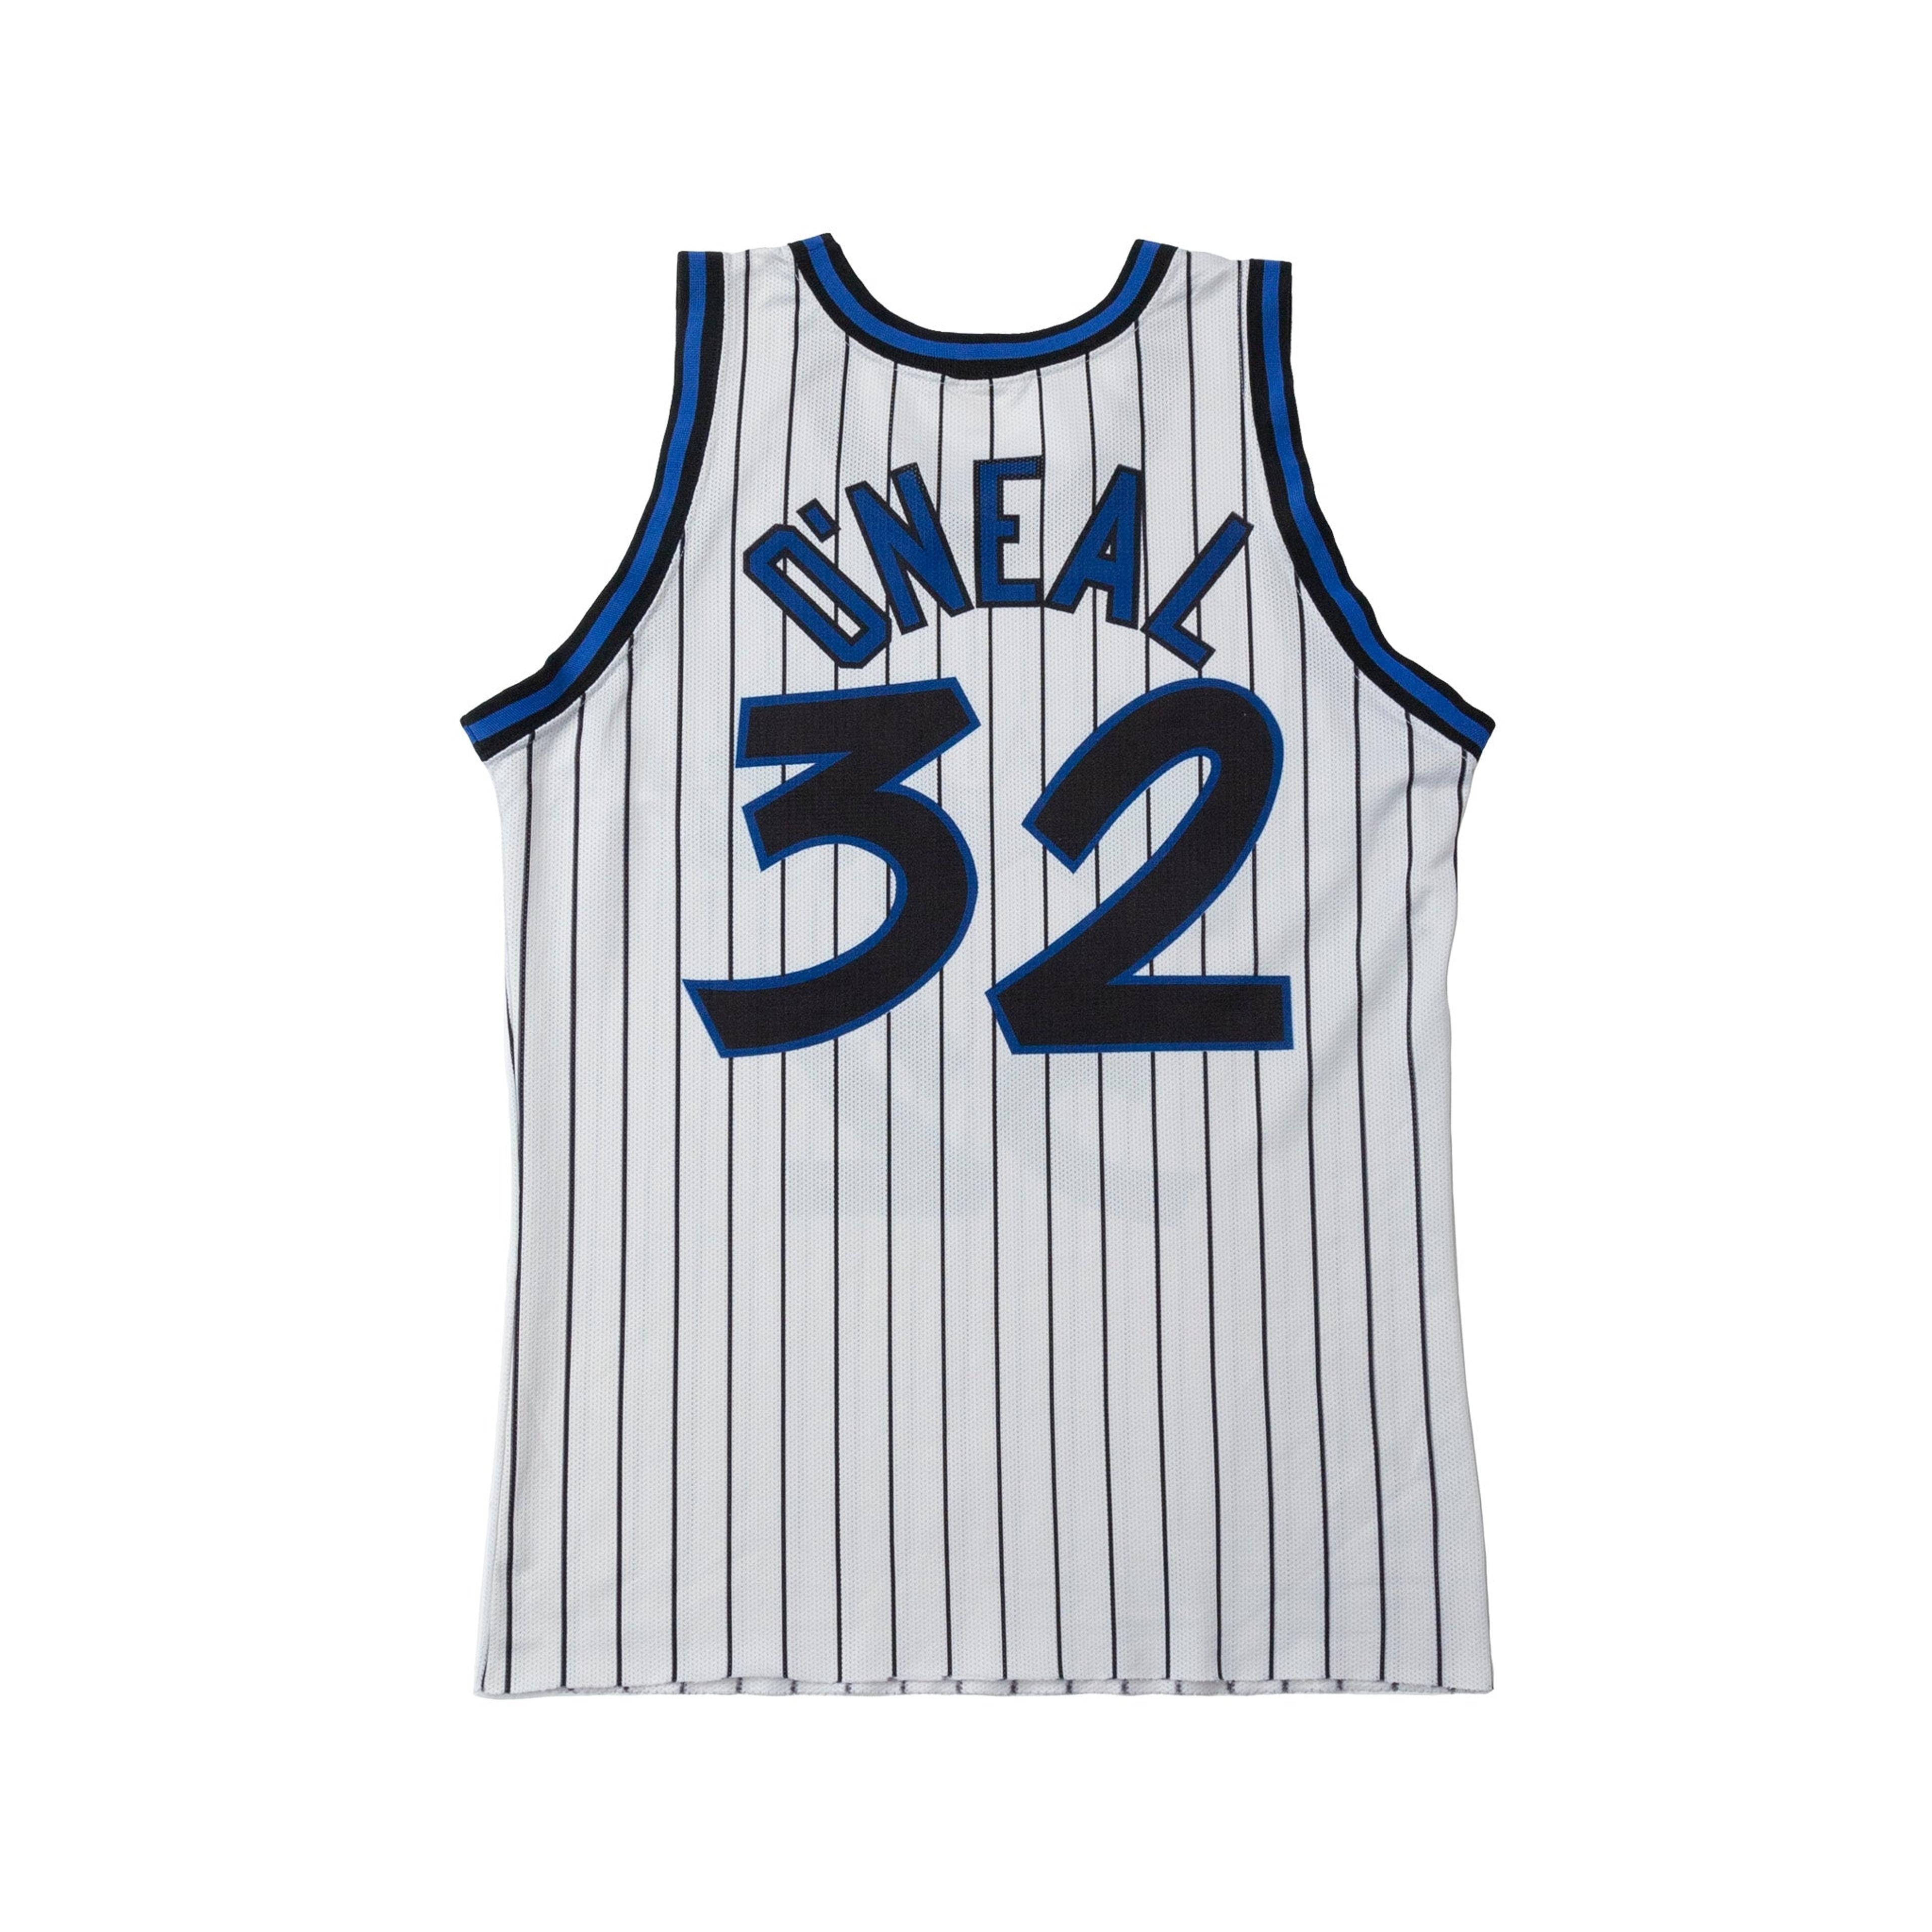 Alternate View 2 of Shaquille O'Neal Champion NBA Rare Vintage Jersey